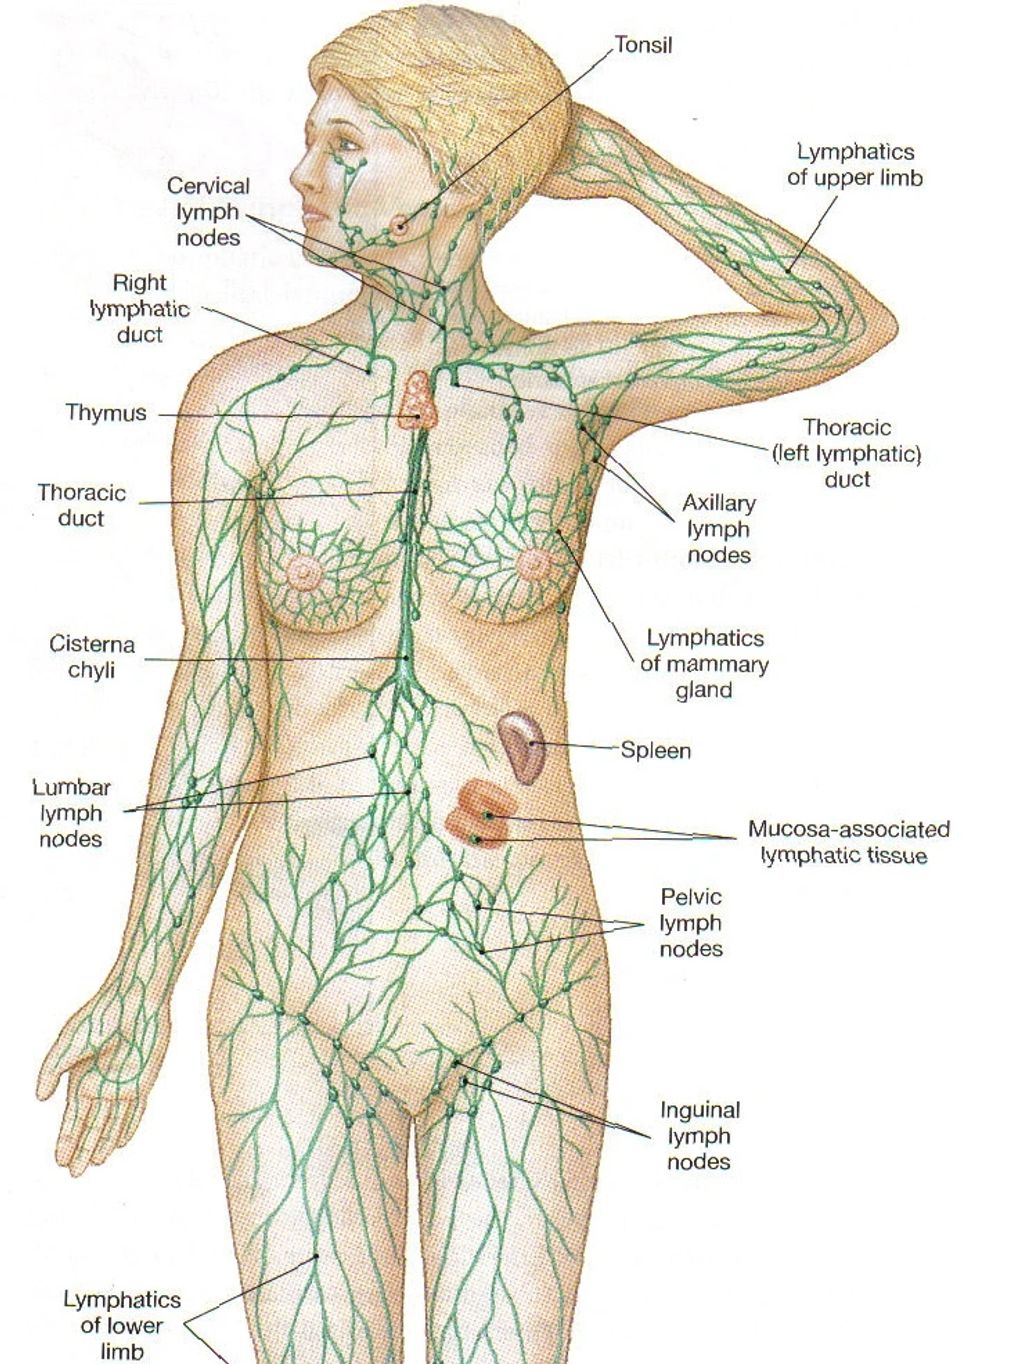 Lymphatic System - 
An overview of the lymphatic vessels, lymph nodes, and lymphoid organs.